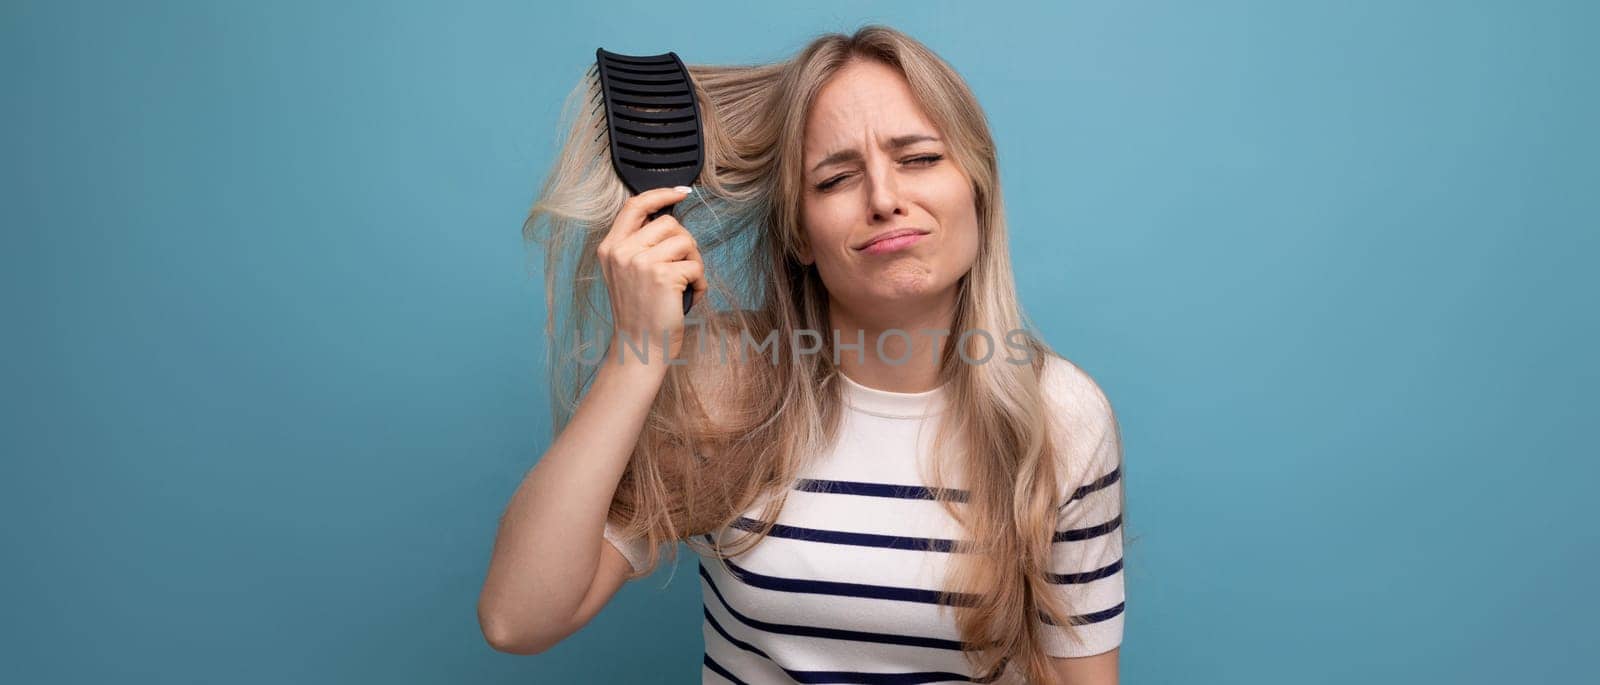 horizontal photo of a sad upset blond young woman with a hairbrush in her hands on a blue background by TRMK